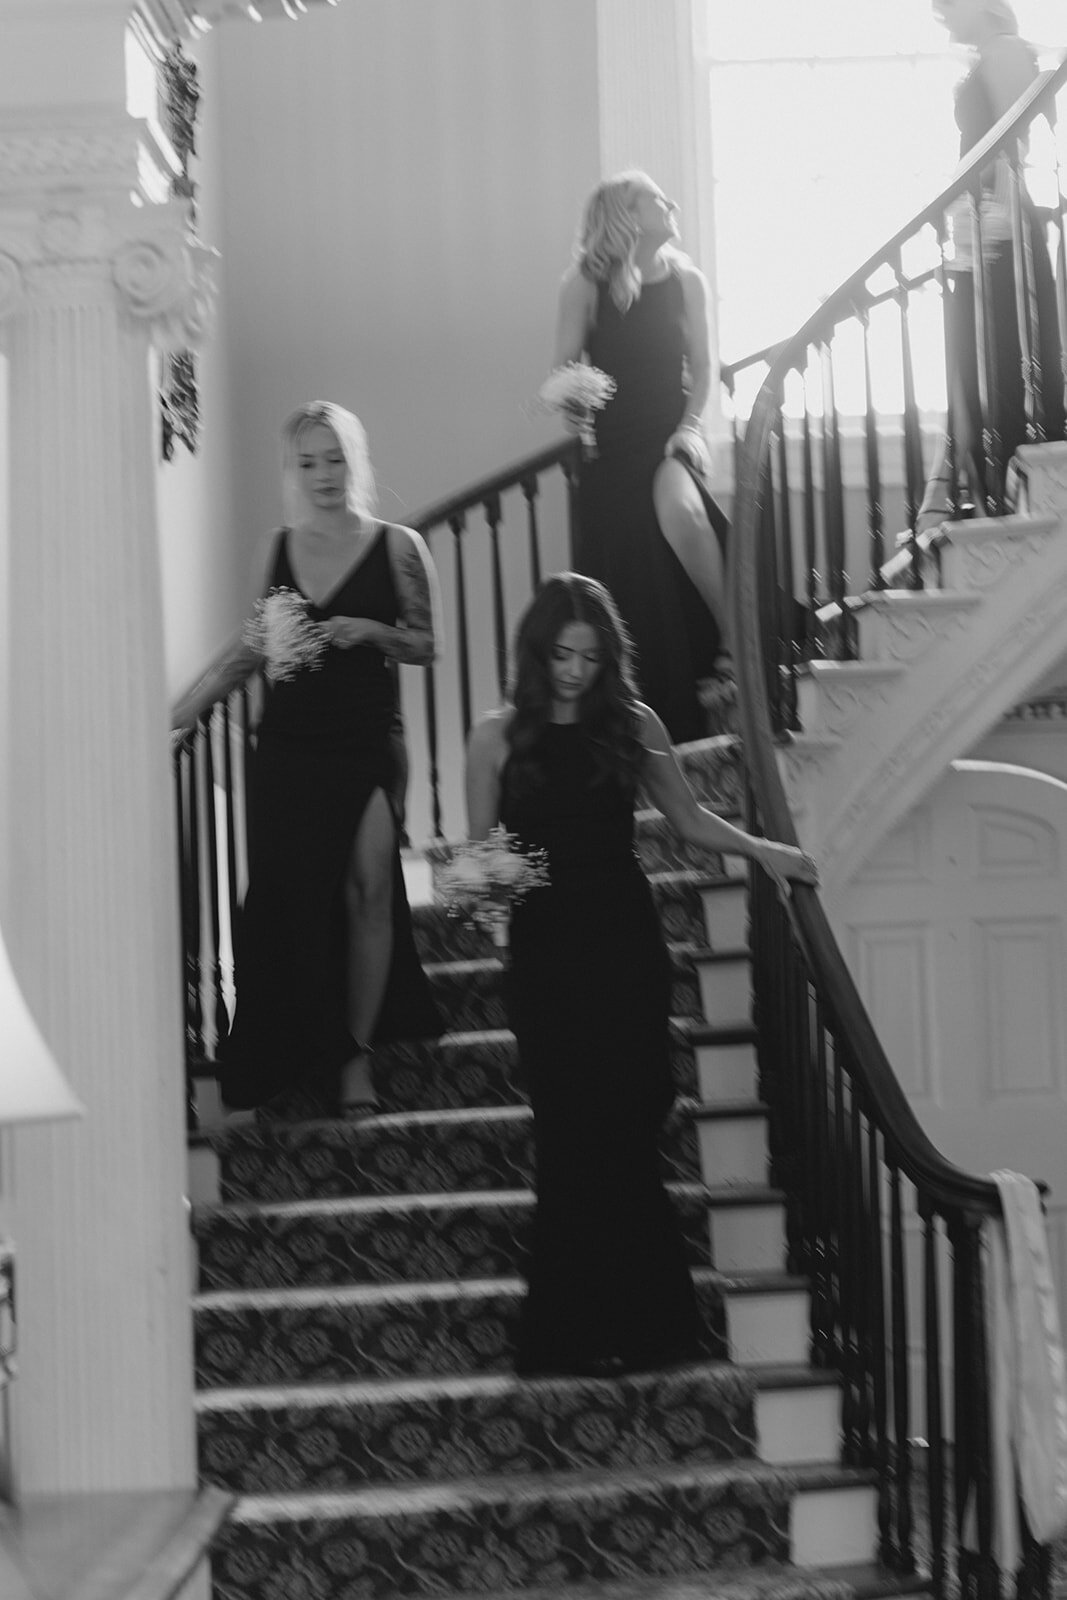 bridesmaids_come_down_stairs_black_and_white_candid_wedding_moment_thomas_bennett_house_curved_staircase_kailee_dimeglio_photography-607_websize